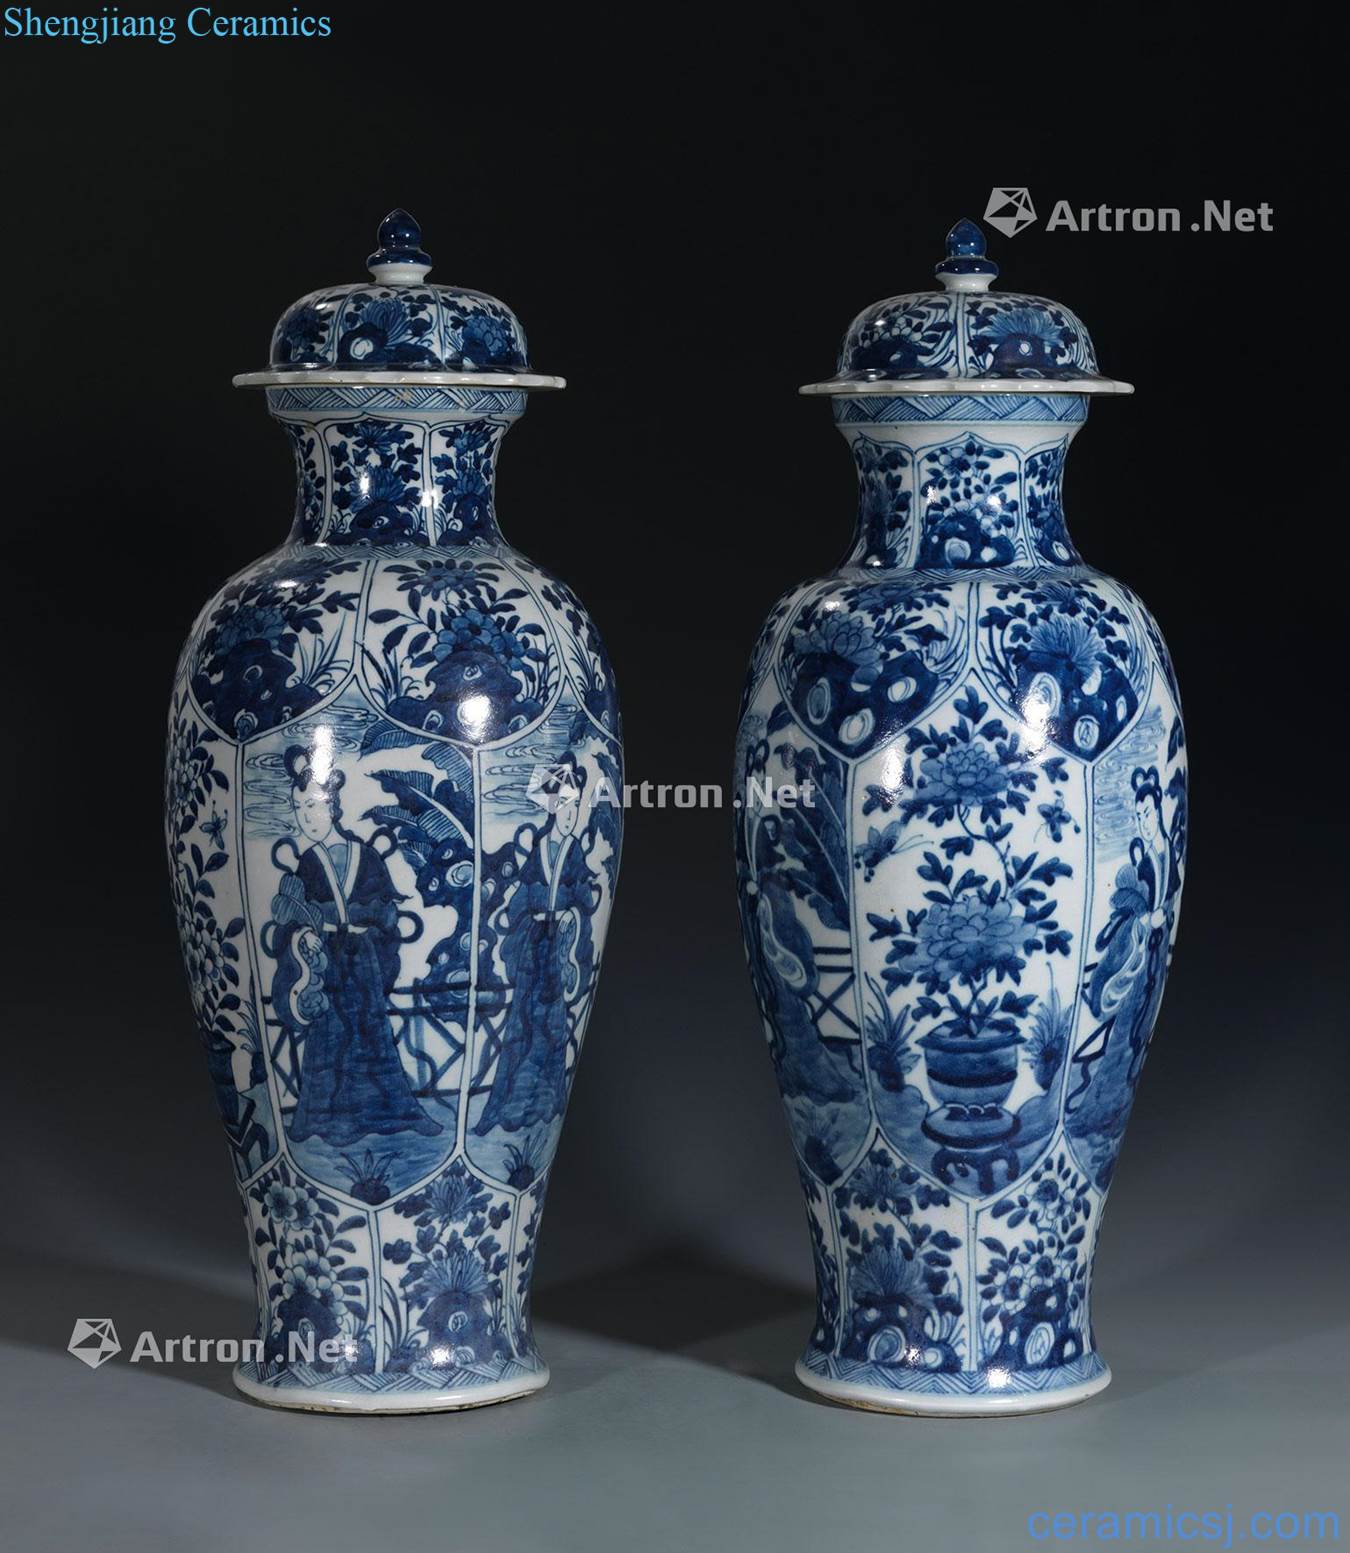 Qing general character flower pot (a)